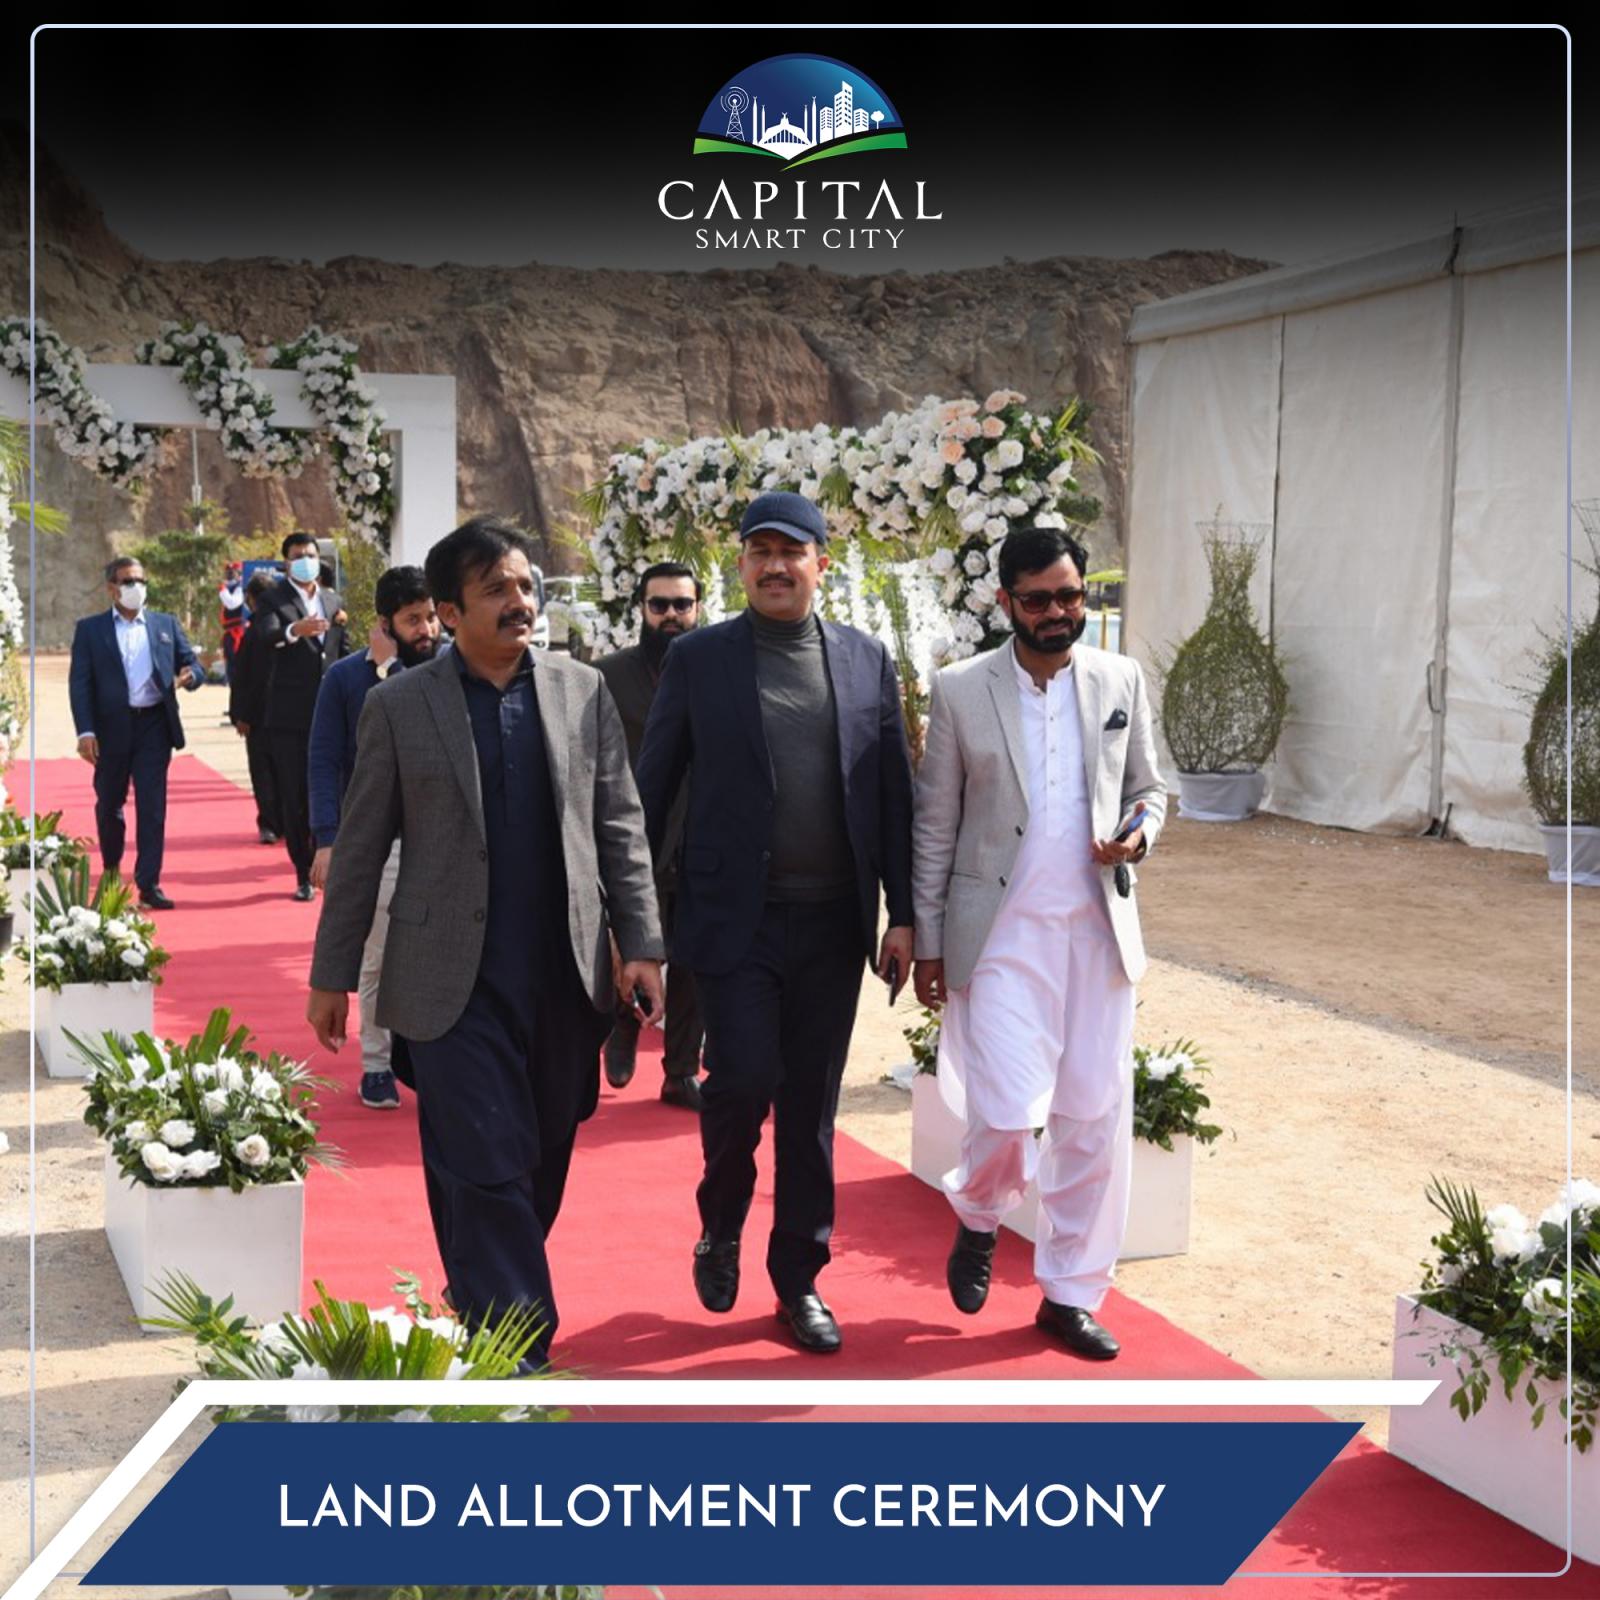 Land Allotment Ceremony on Capital Smart City Site